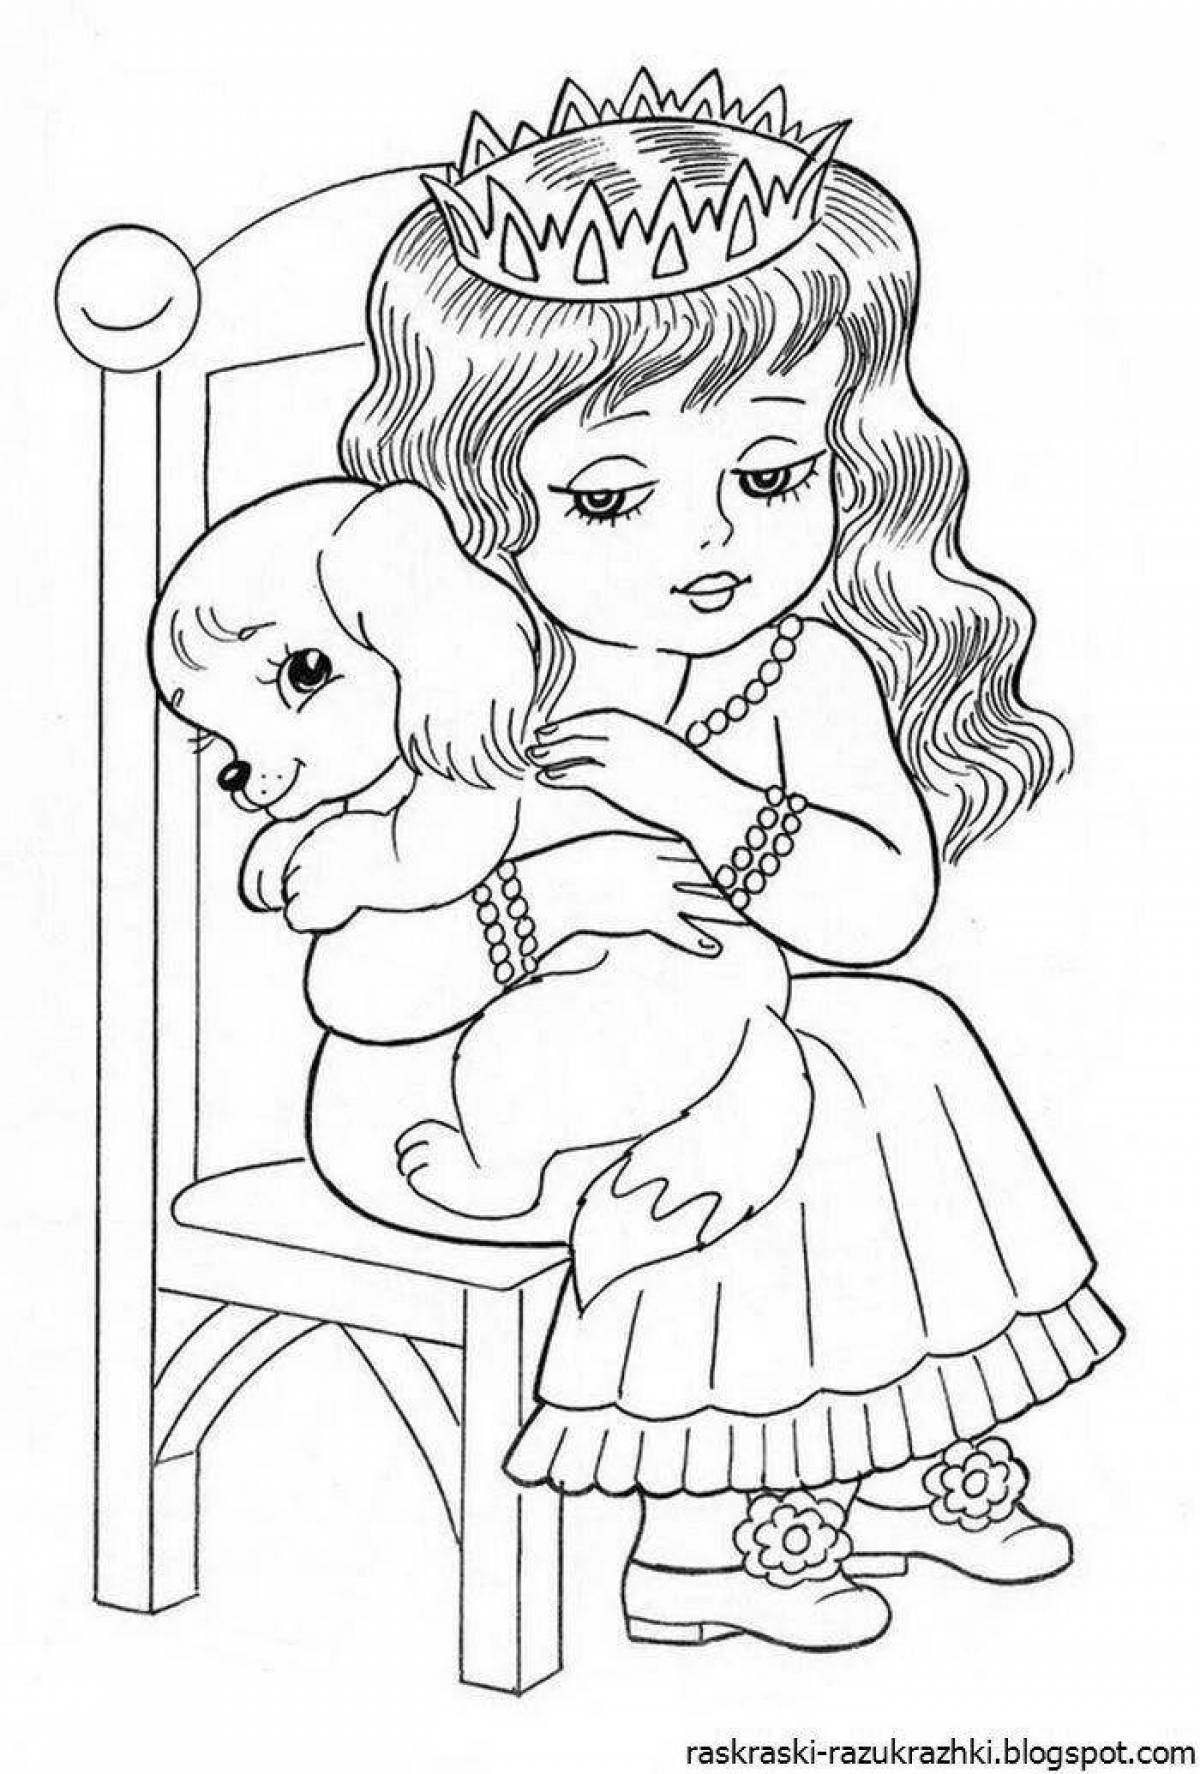 Radiant coloring page princess dolls